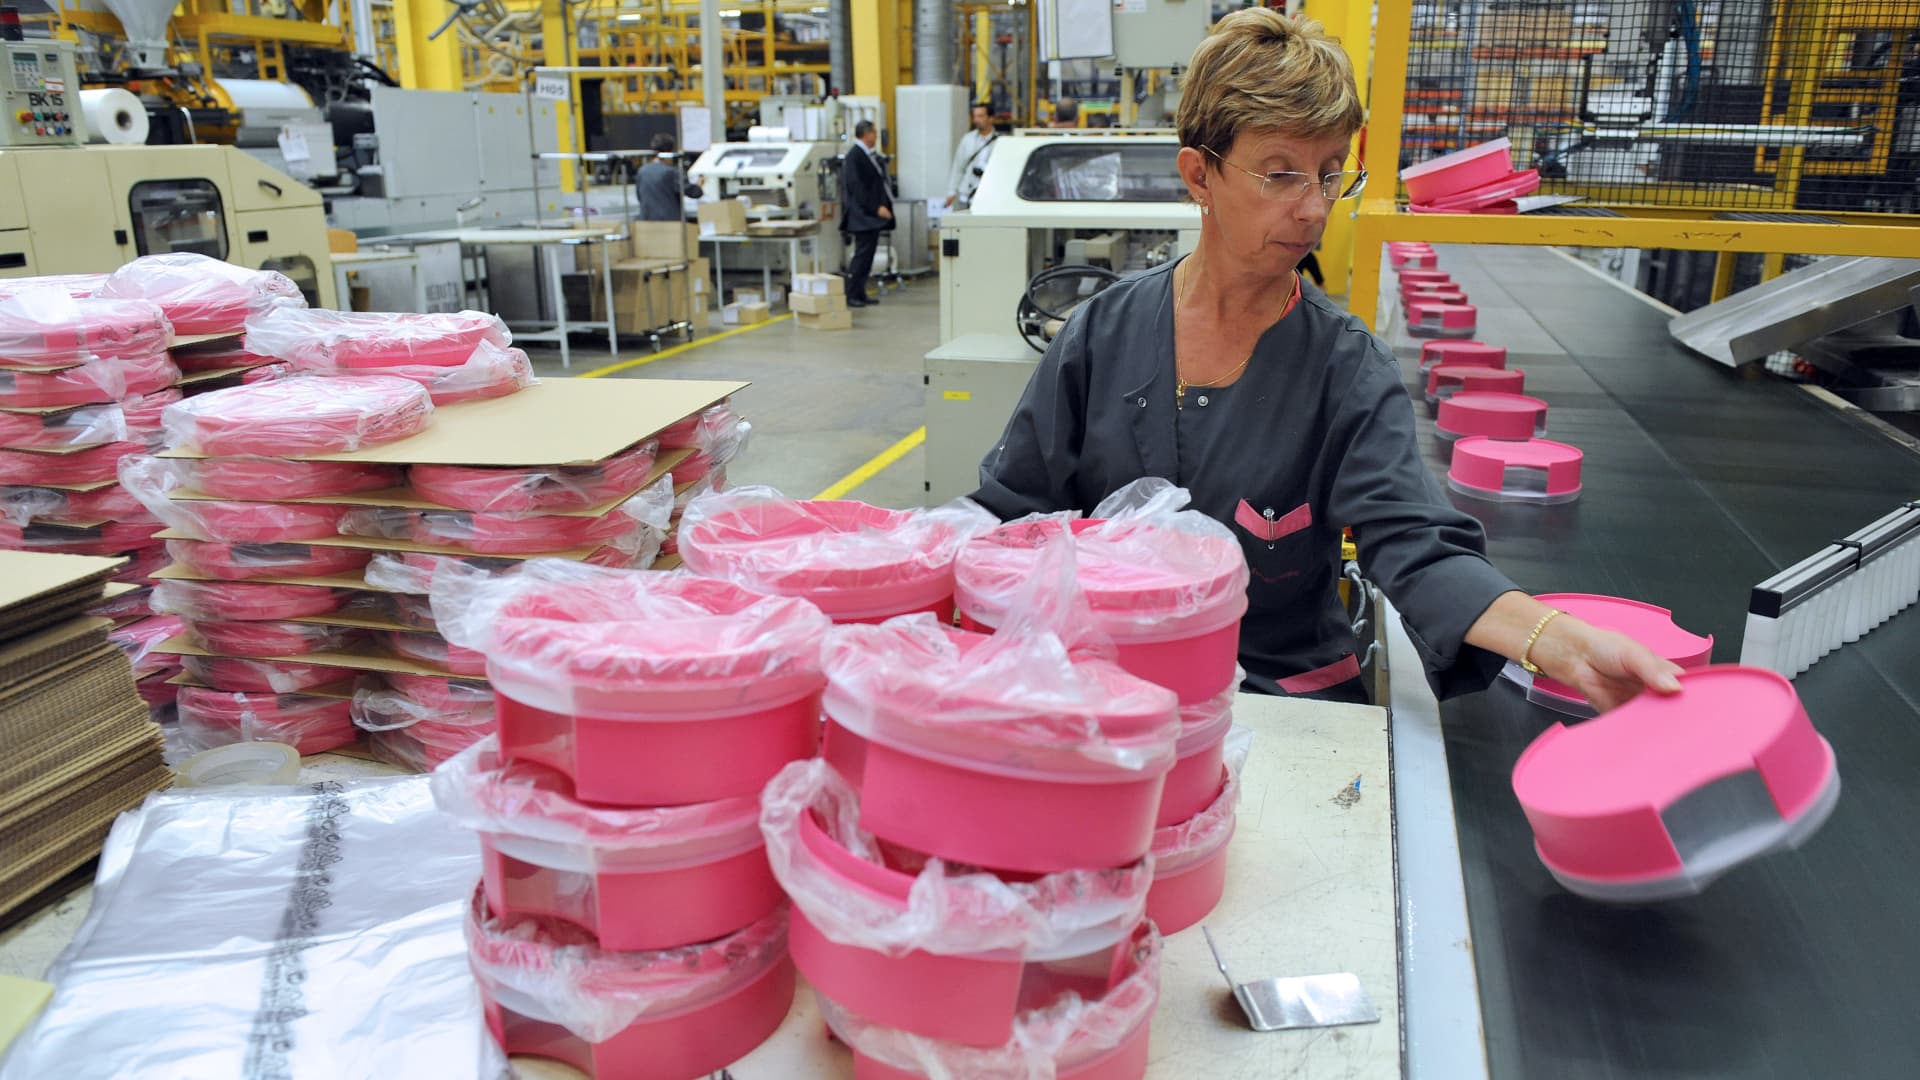 Stocks making the biggest moves midday: Tupperware, Paramount and more